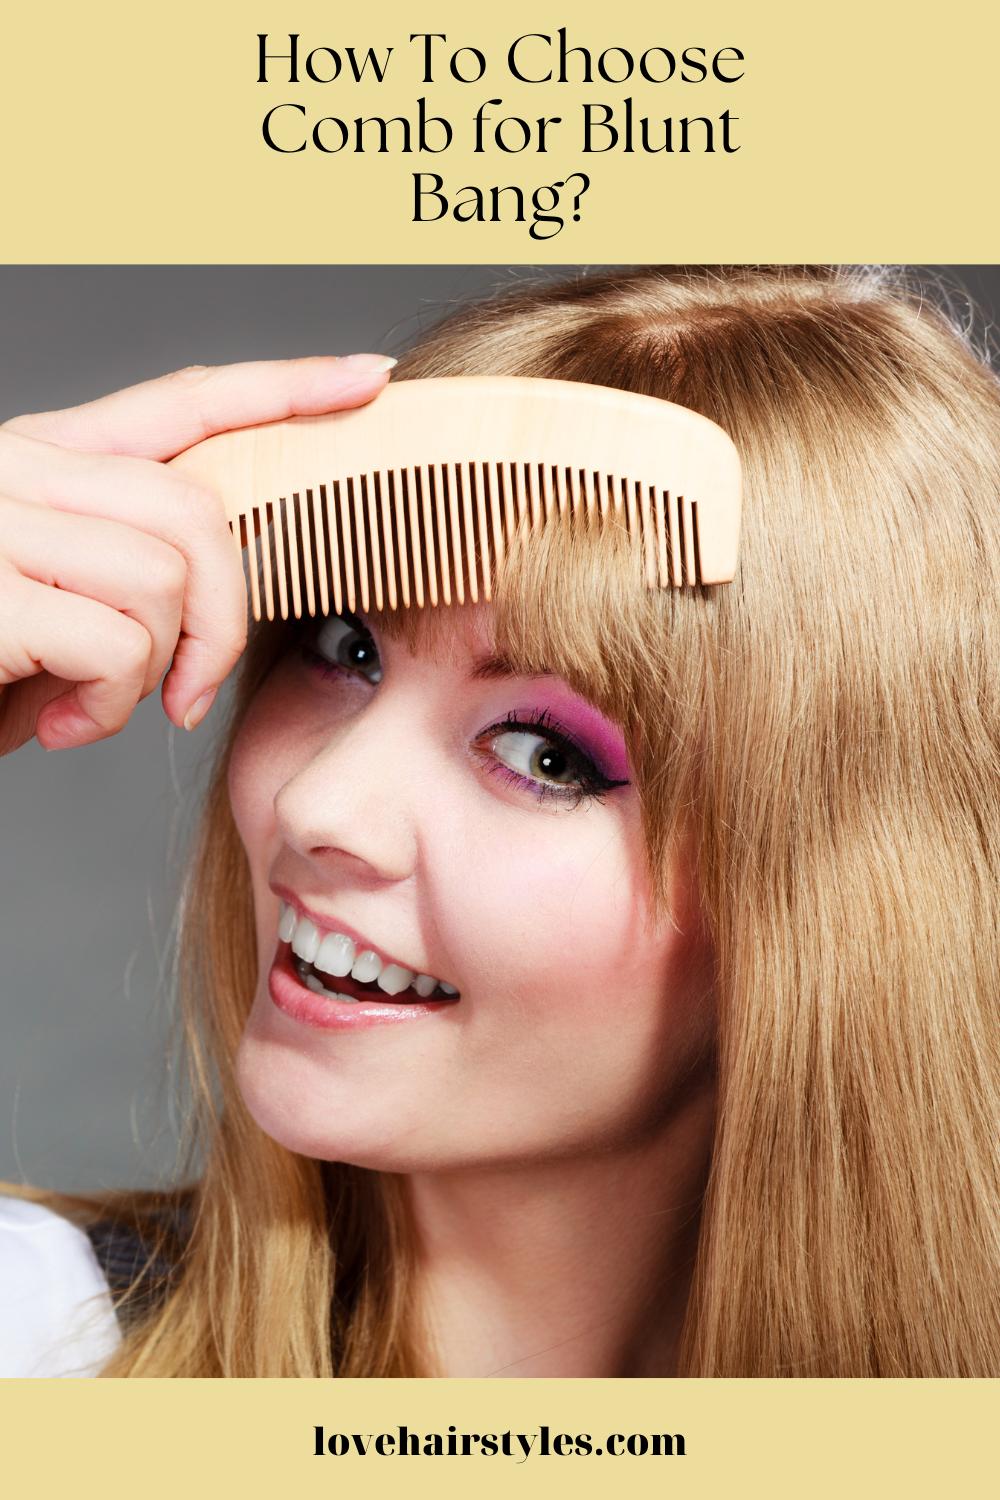 How To Choose Comb for Blunt Bang?